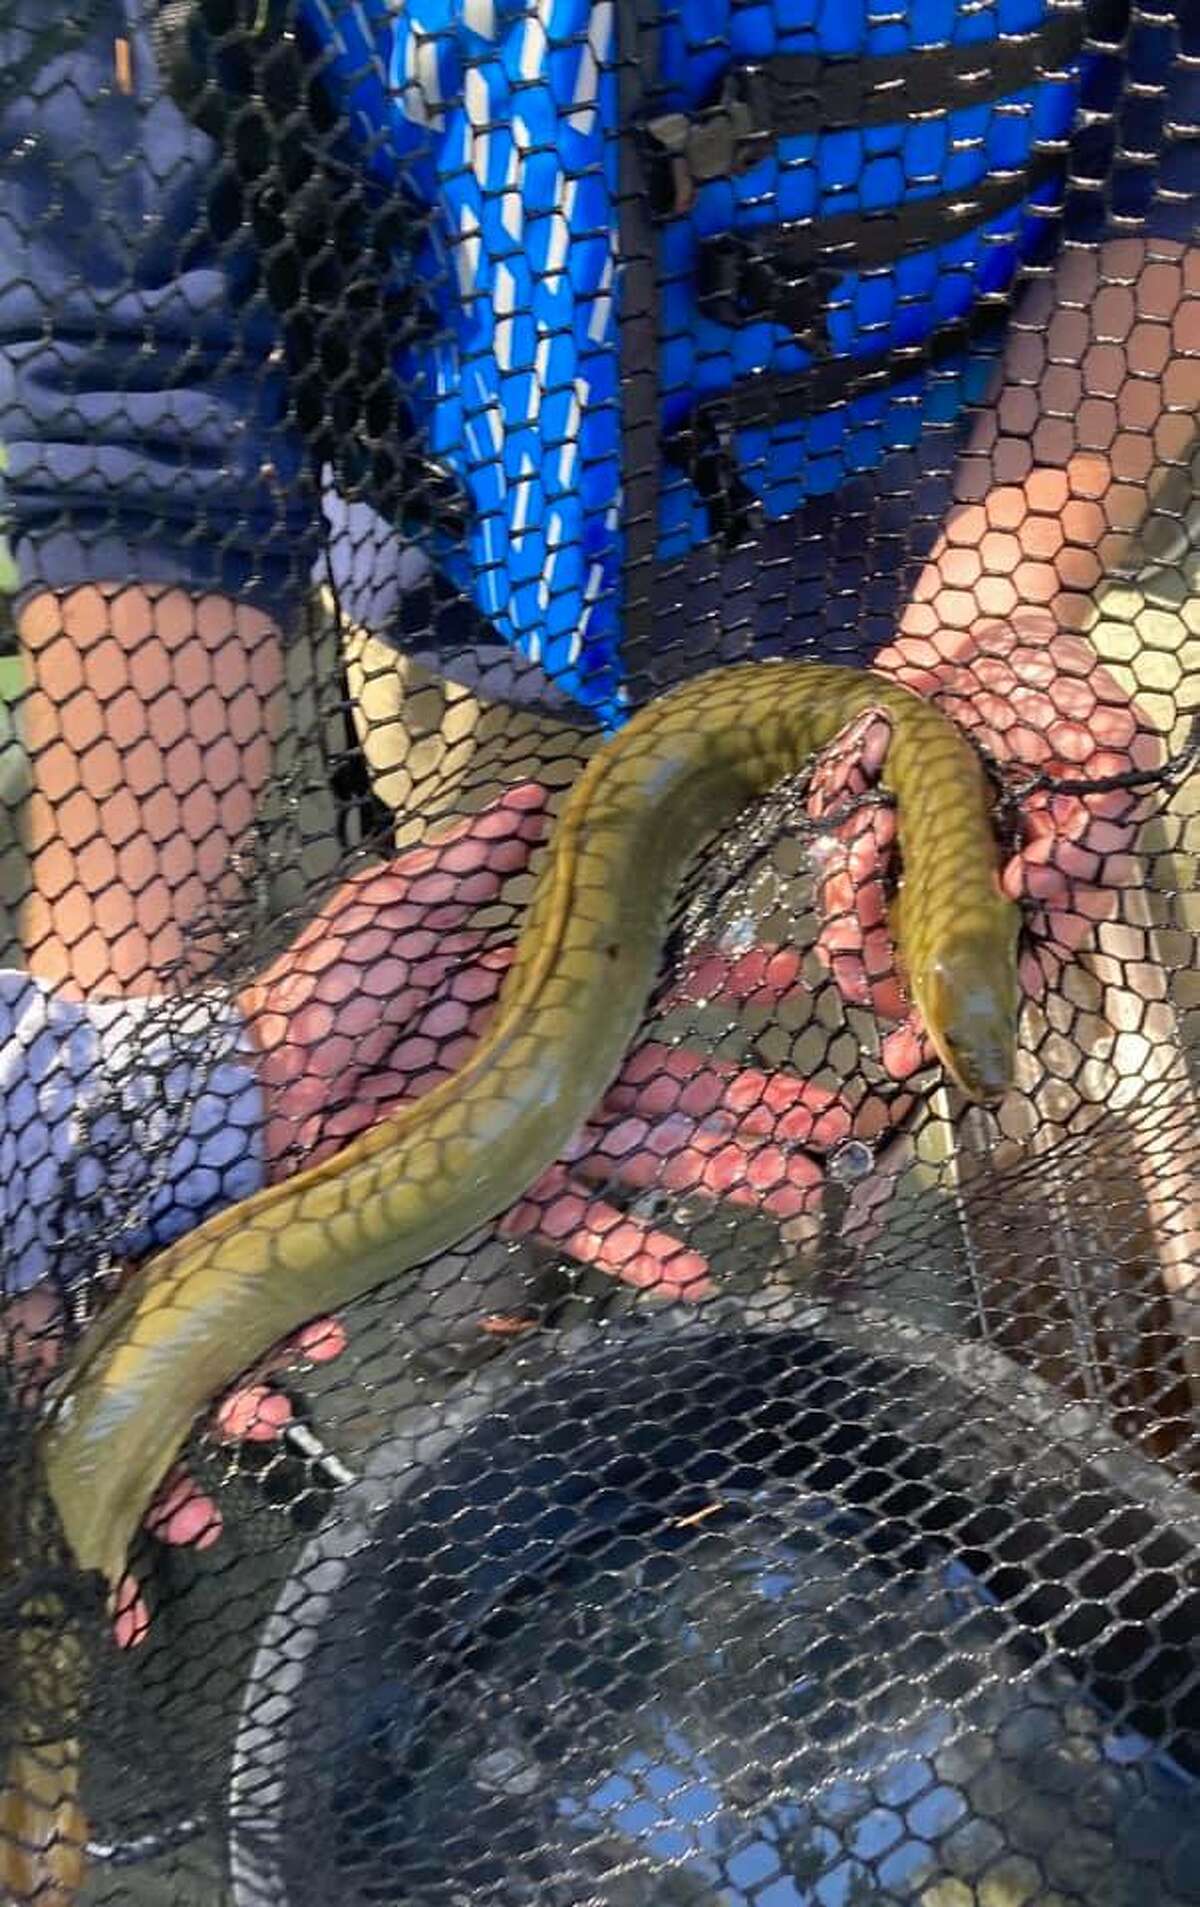 Staff members at Inland Fisheries San Antonio District said they caught and released their first-ever America eel at Media River during a recent Guadalupe Bass survey conducted earlier this month.